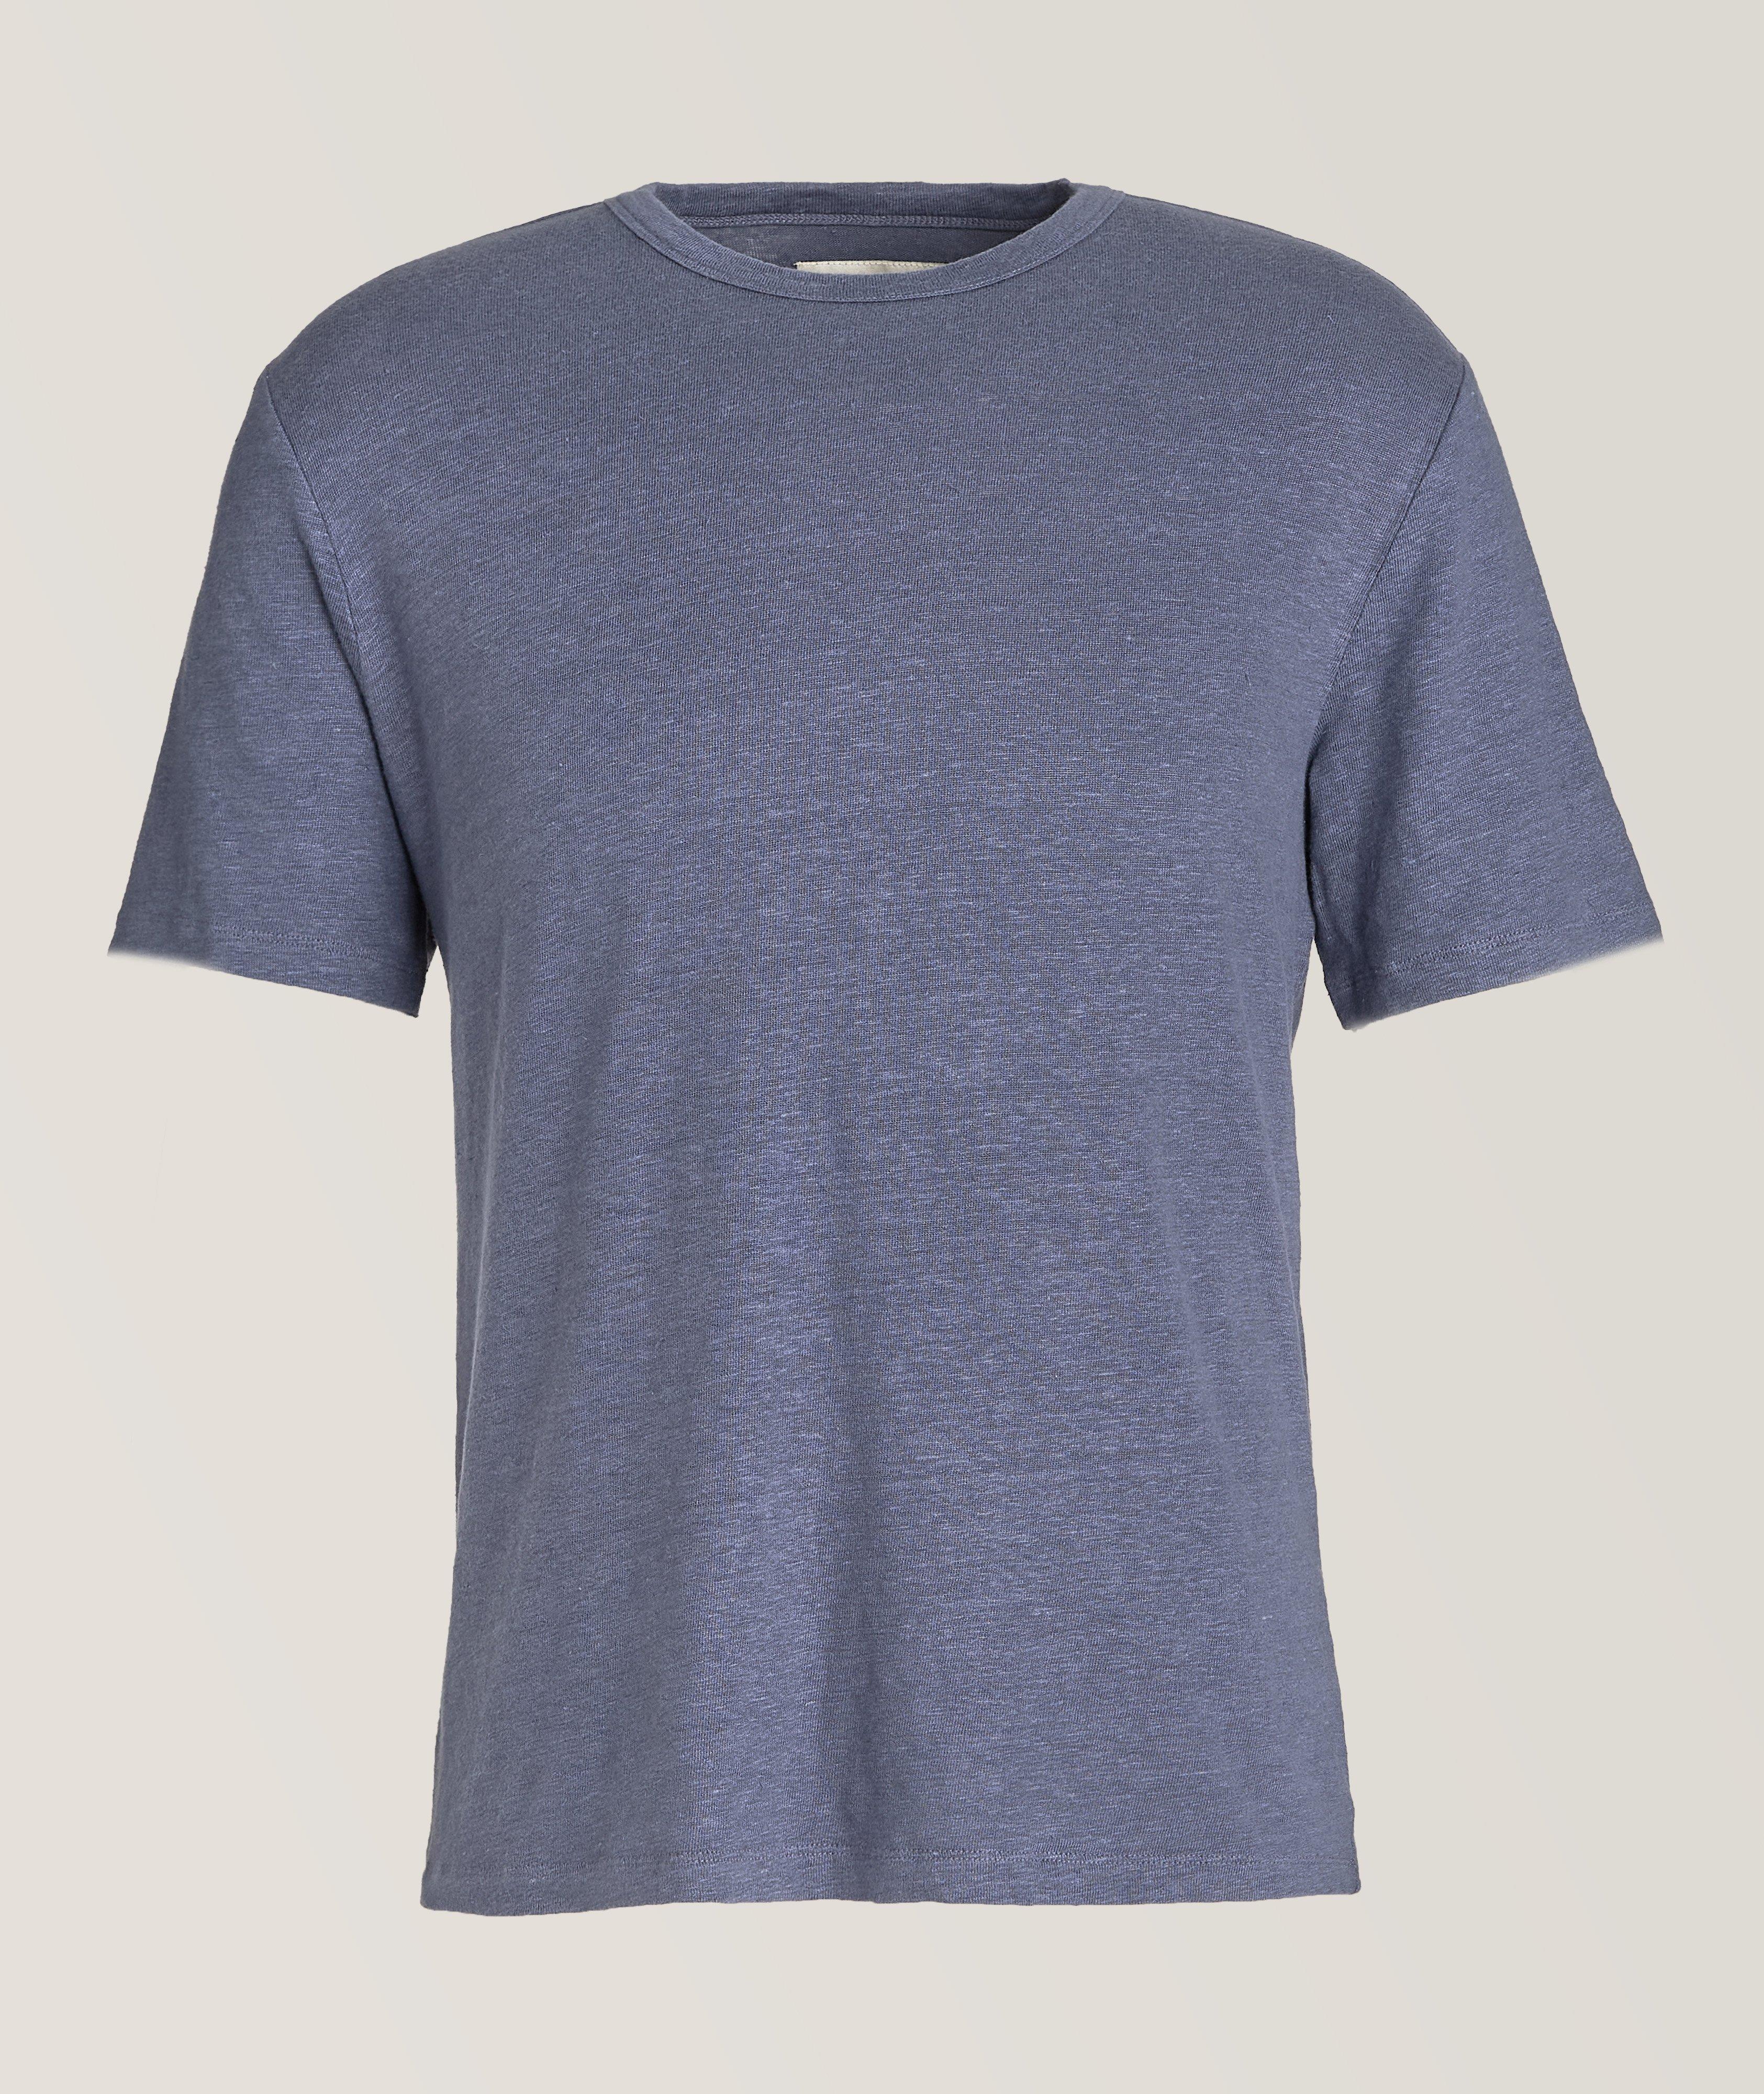 Piece Dyed Stretch-Linen T-Shirt image 0